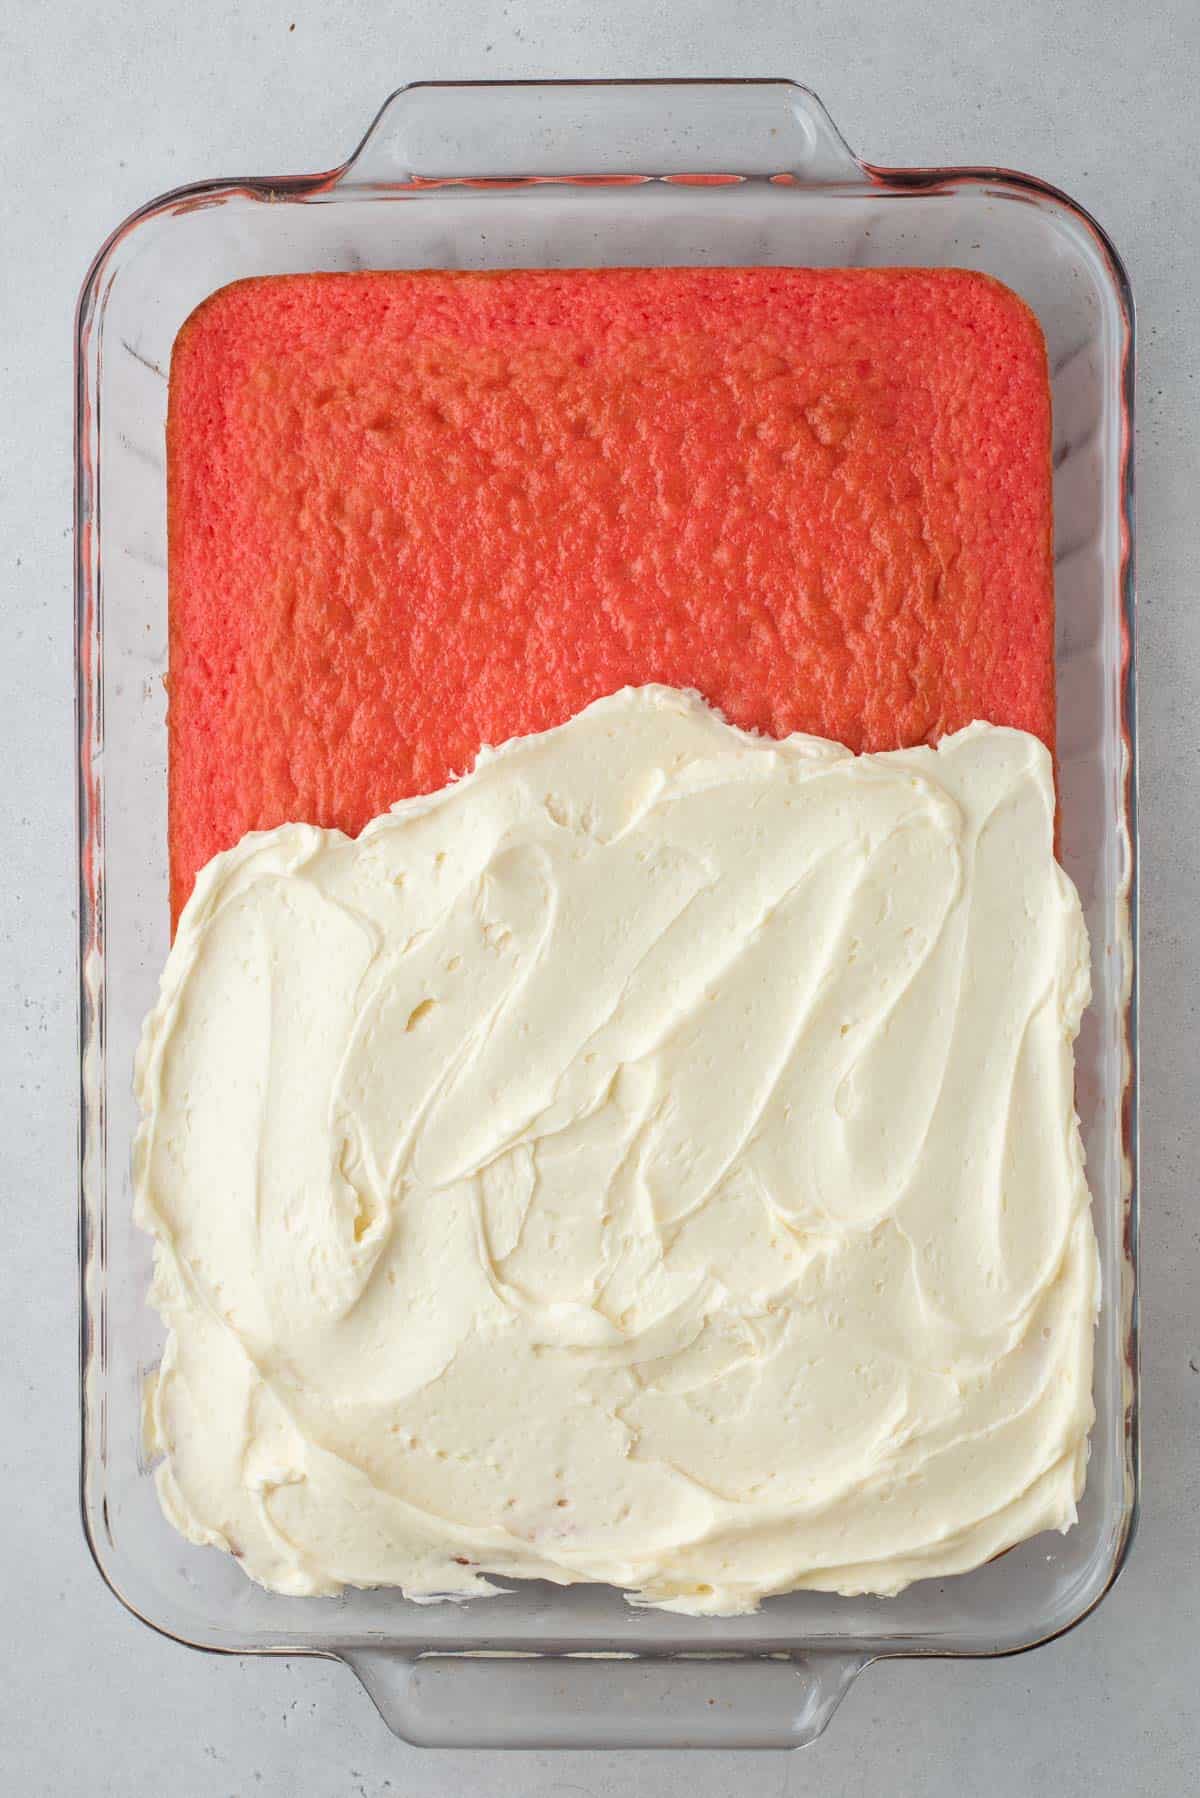 strawberry cake in a glass baking dish half covered in vanilla frosting